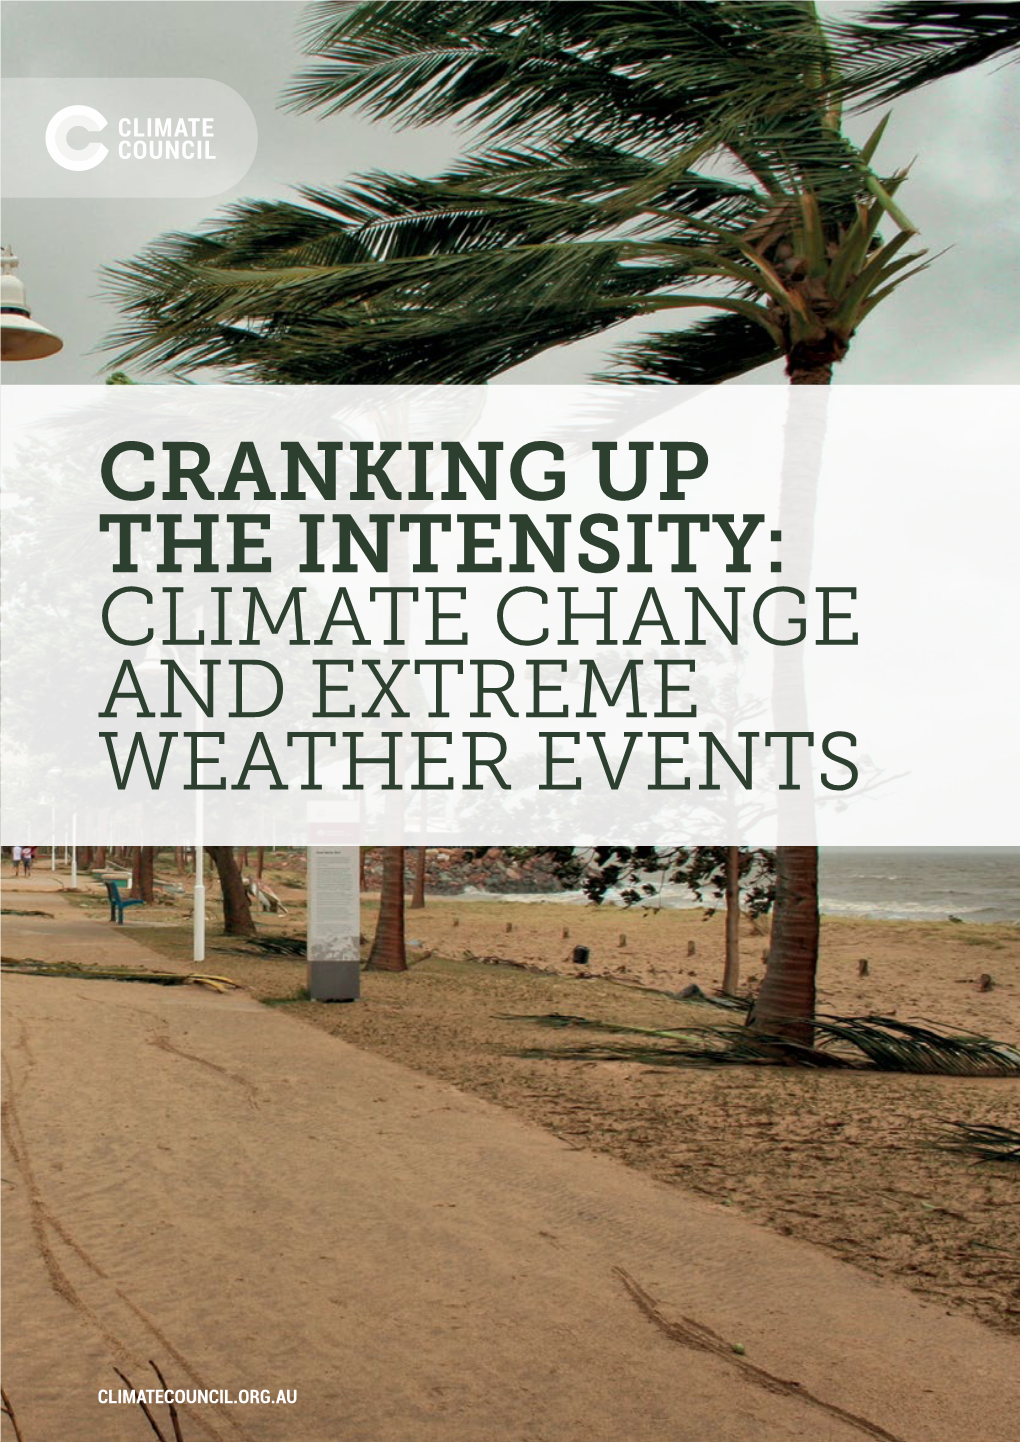 Cranking up the Intensity: Climate Change and Extreme Weather Events